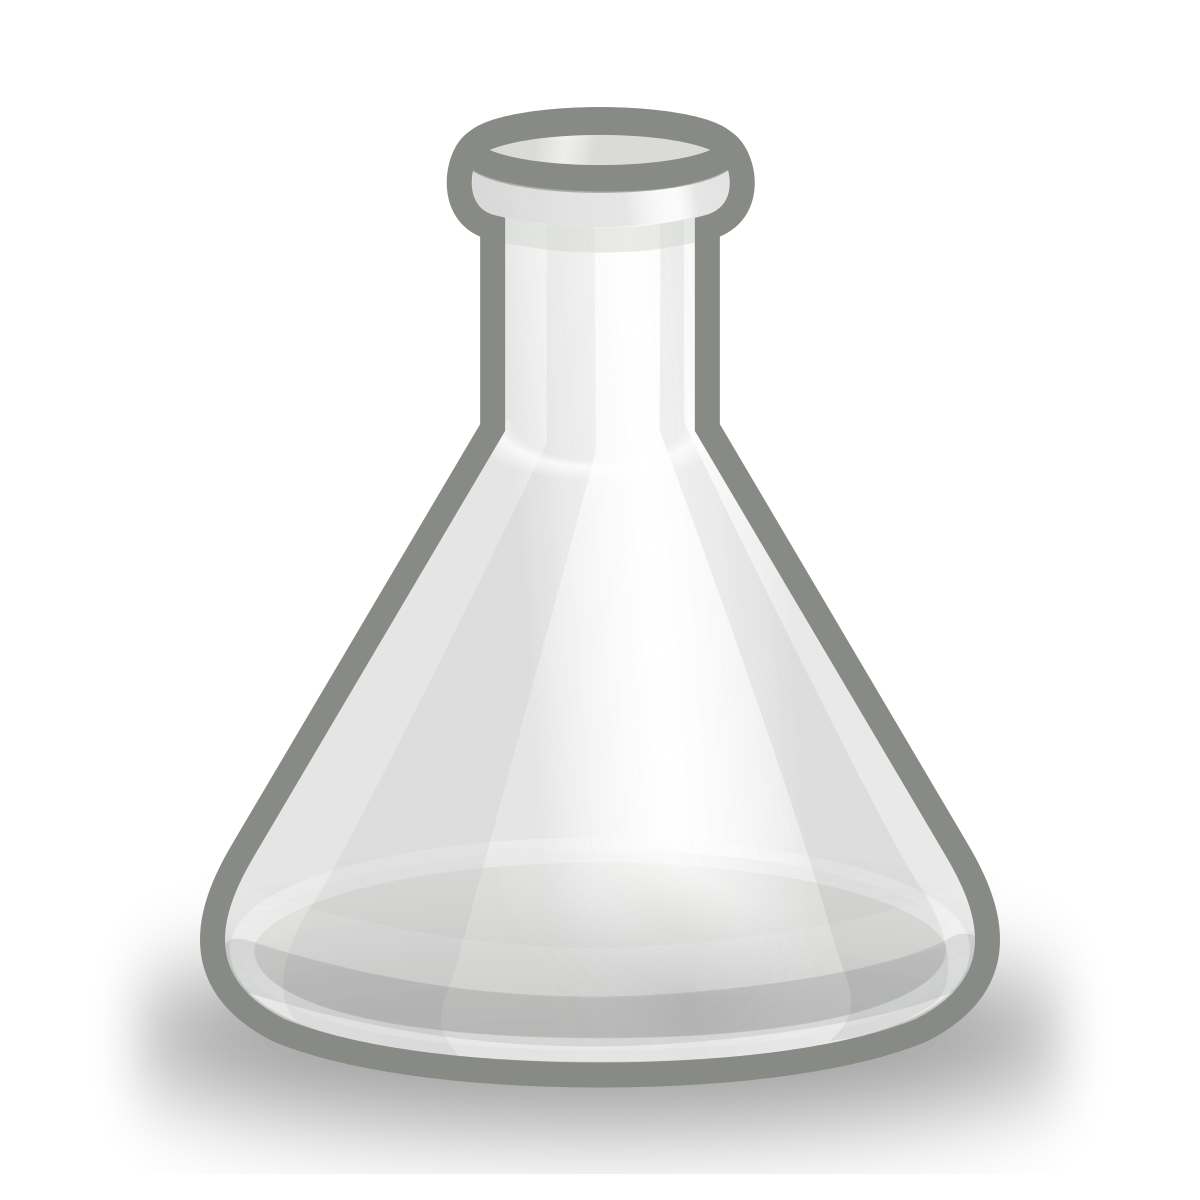 Flask Chemistry Background PNG Image